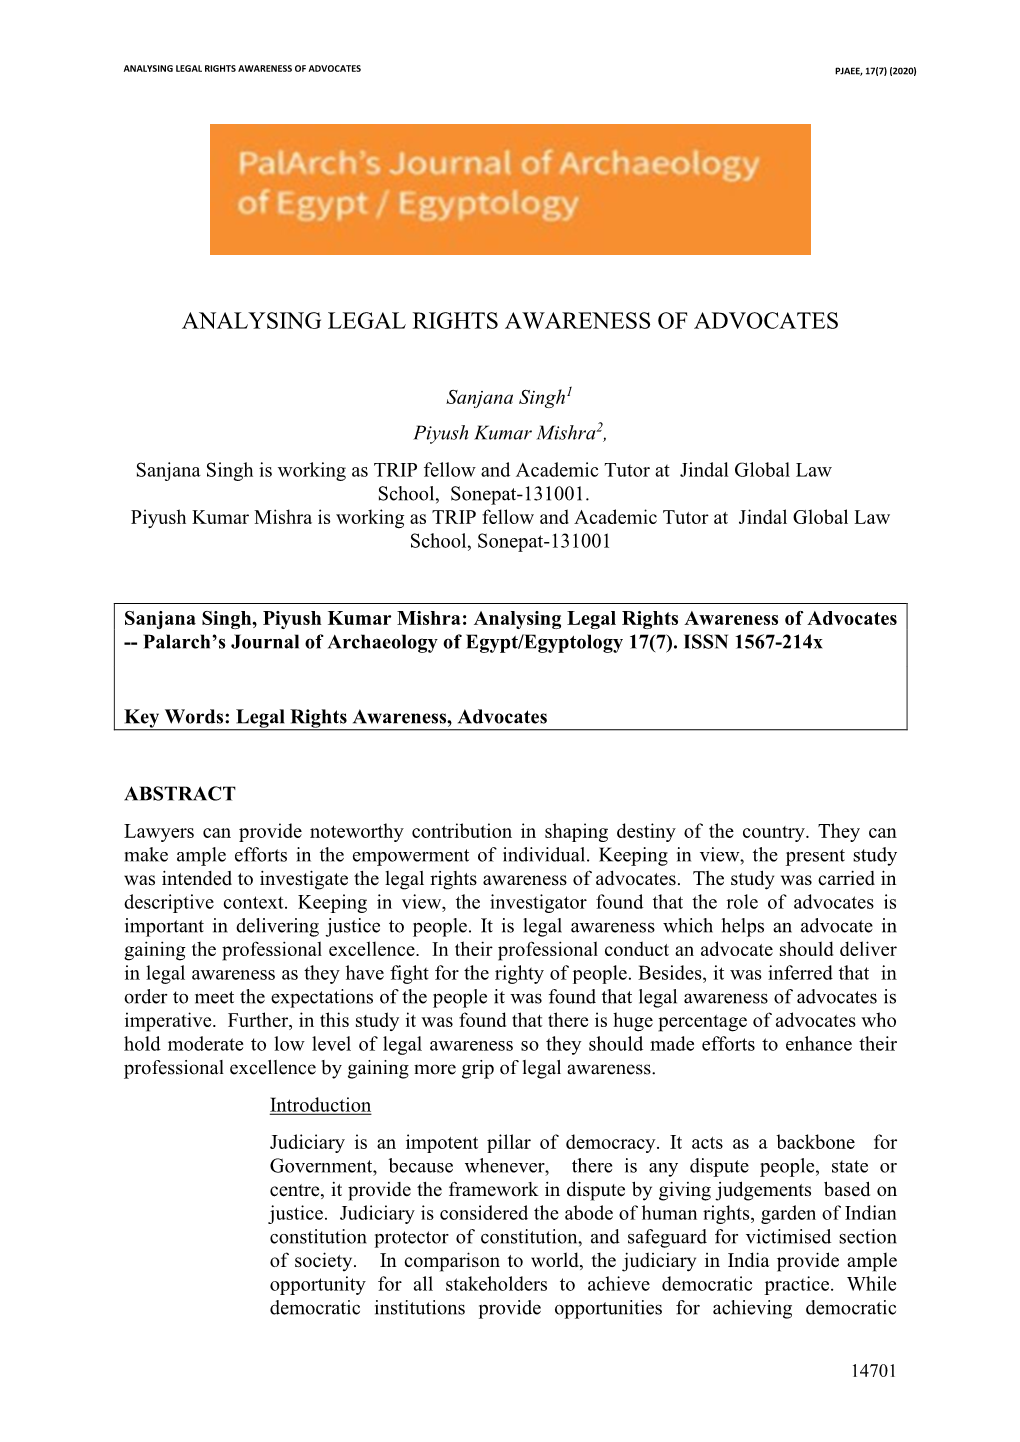 Analysing Legal Rights Awareness of Advocates Pjaee, 17(7) (2020)